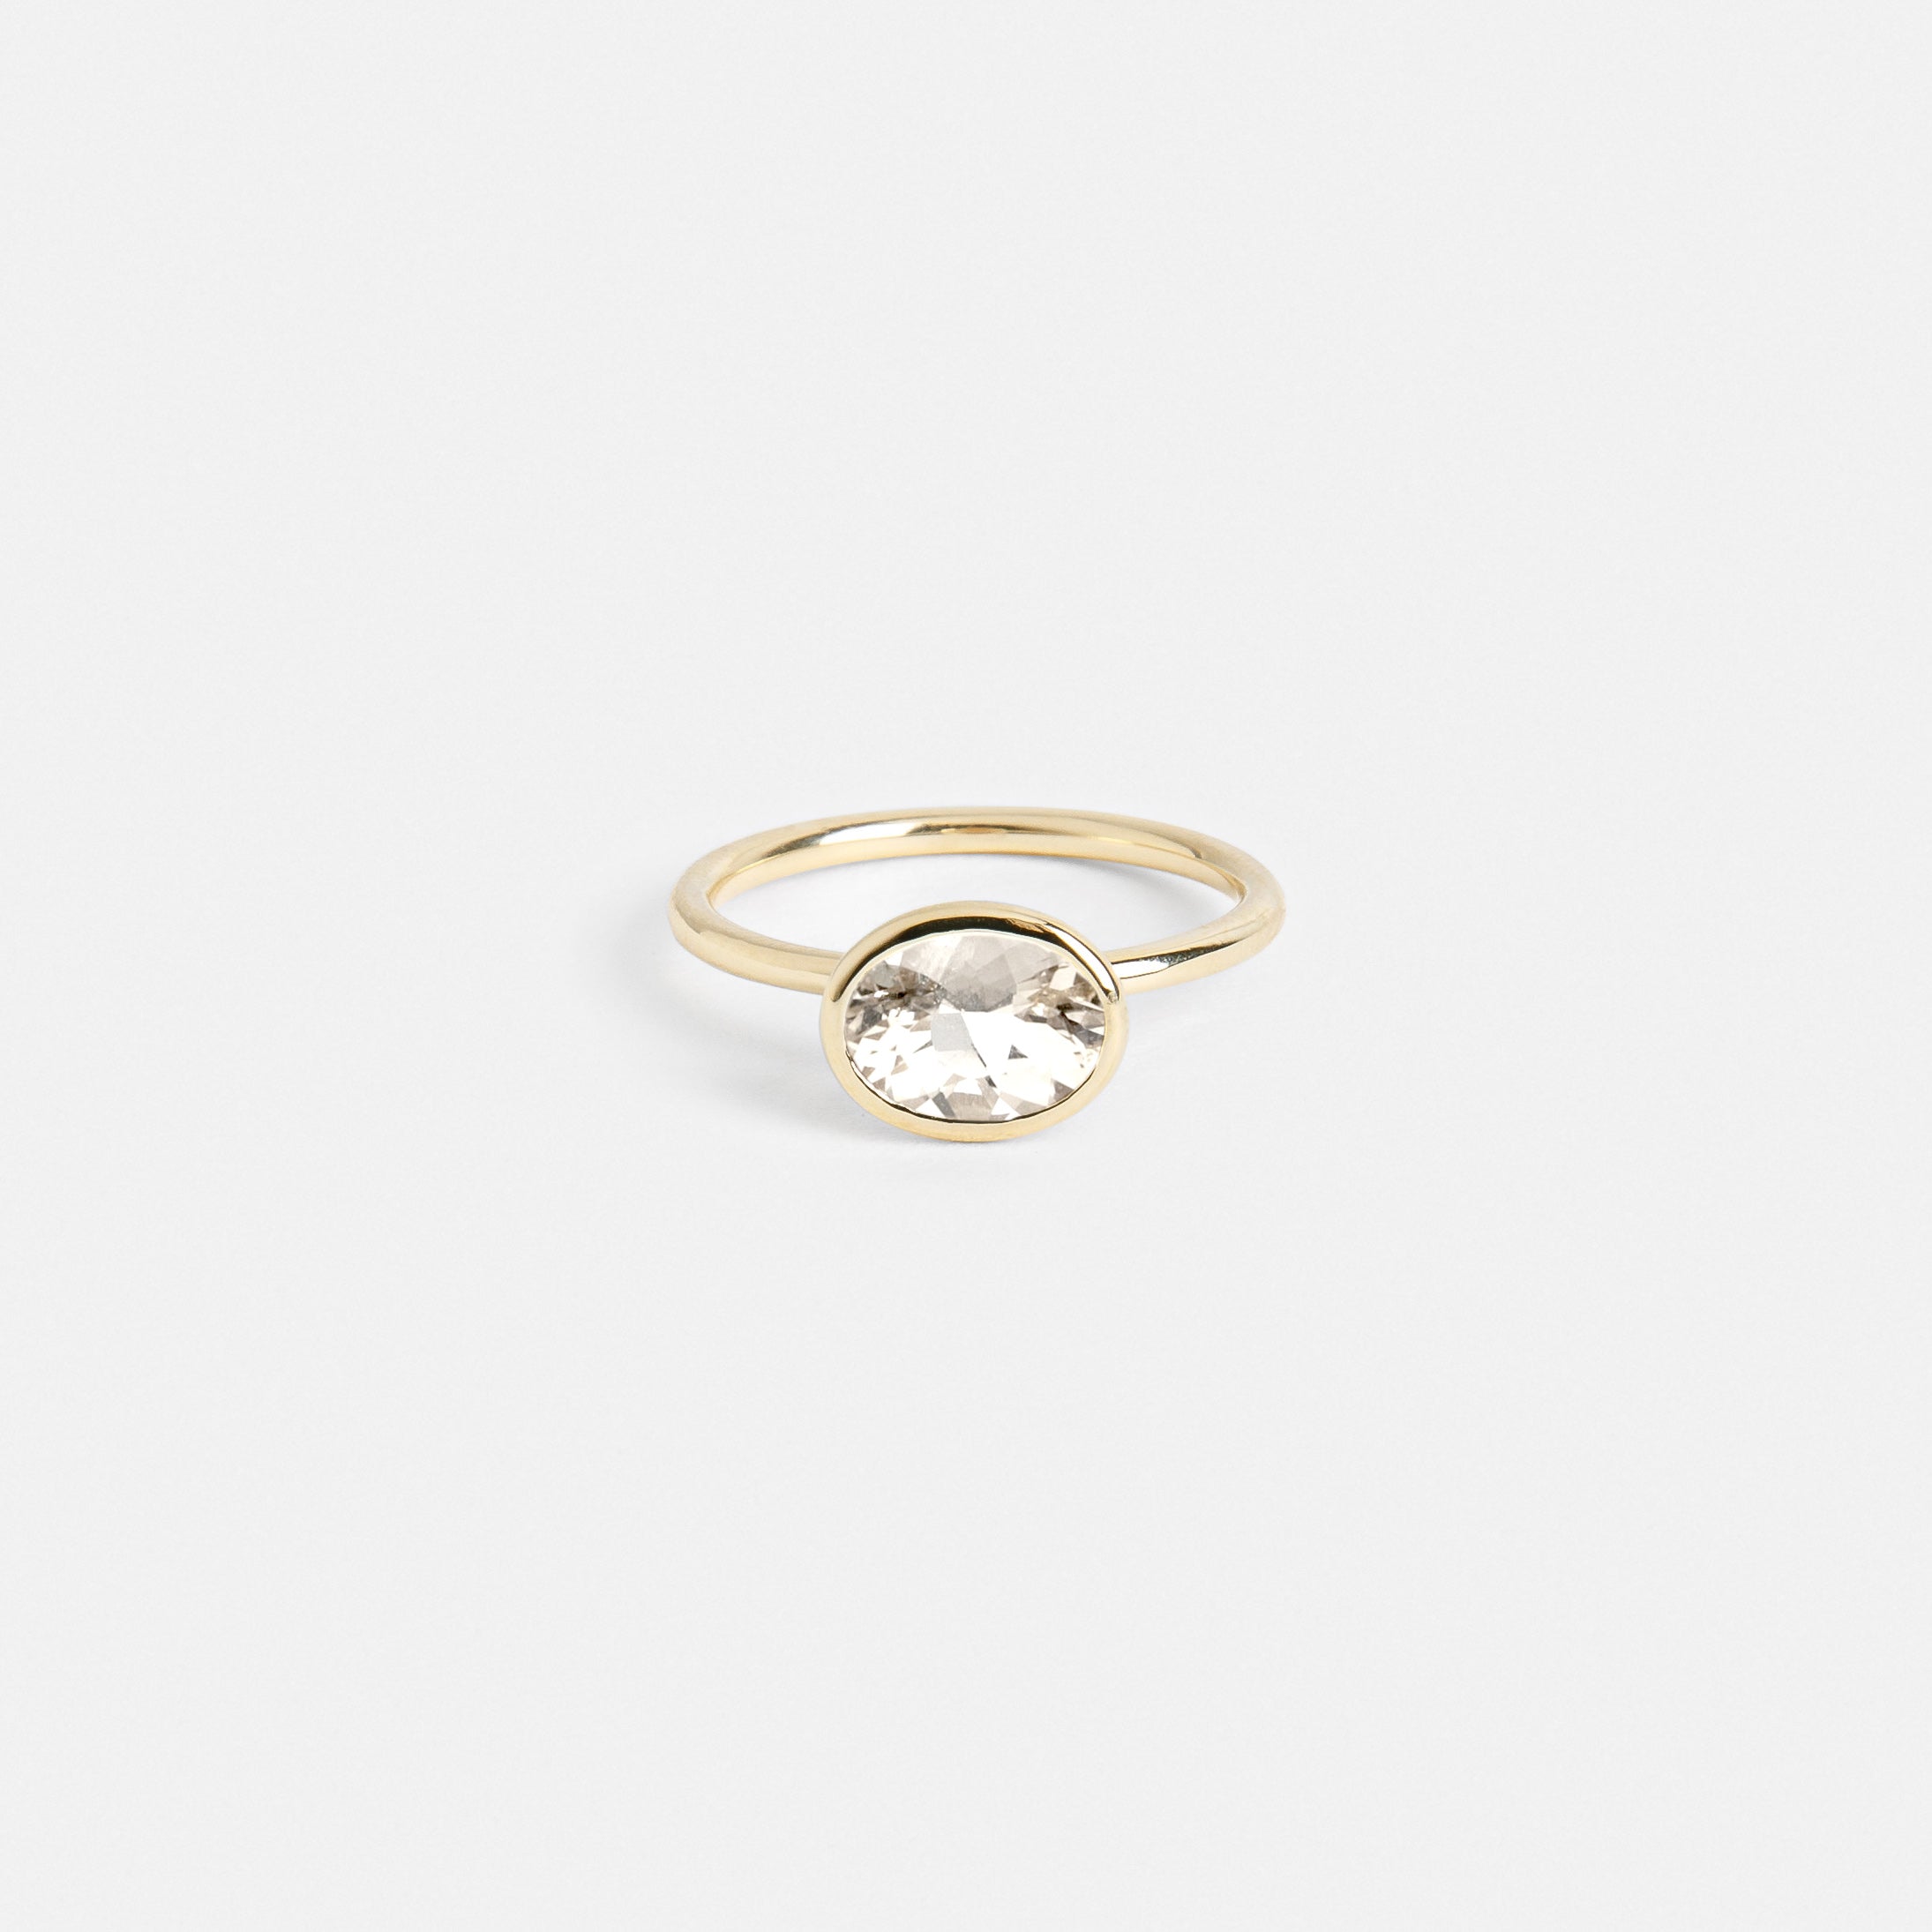 Lida Handmade Ring in 14k Gold set with an oval brilliant cut lab-grown diamond By SHW Fine Jewelry NYC